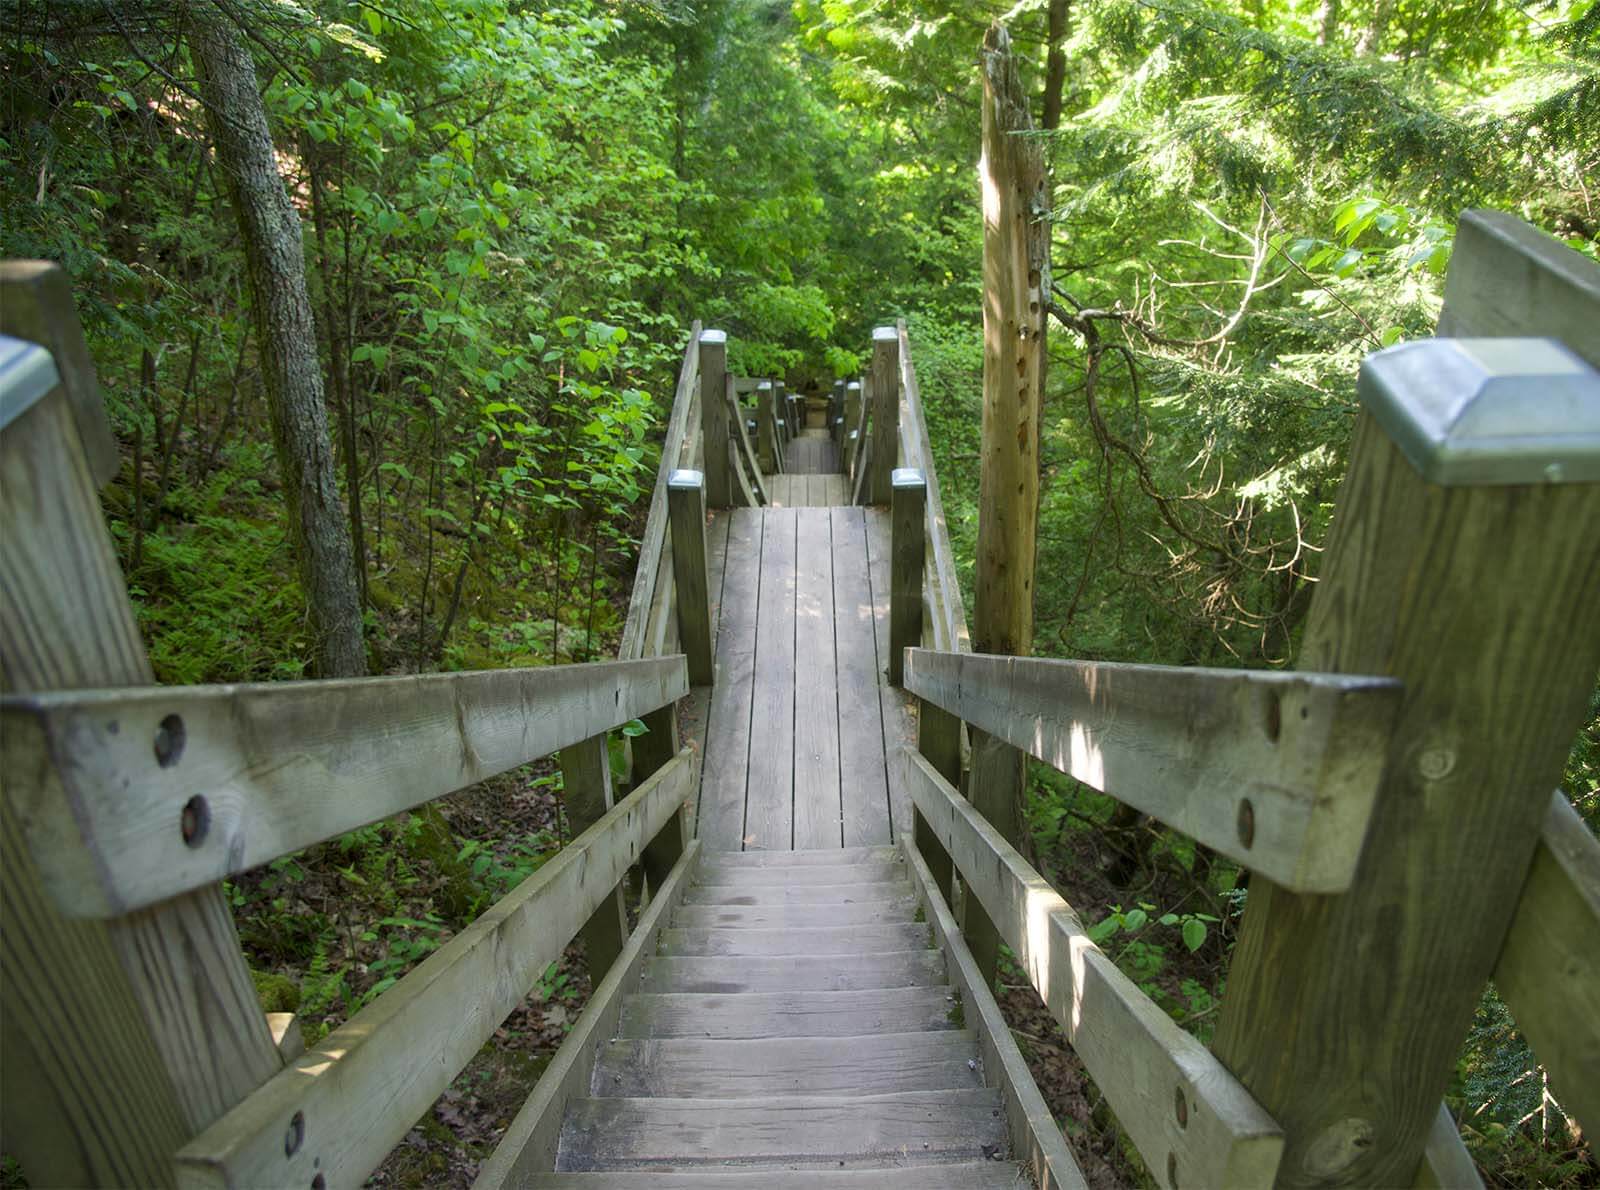 Wooden hiking path with stairs at Mountain Park Lookout Tower